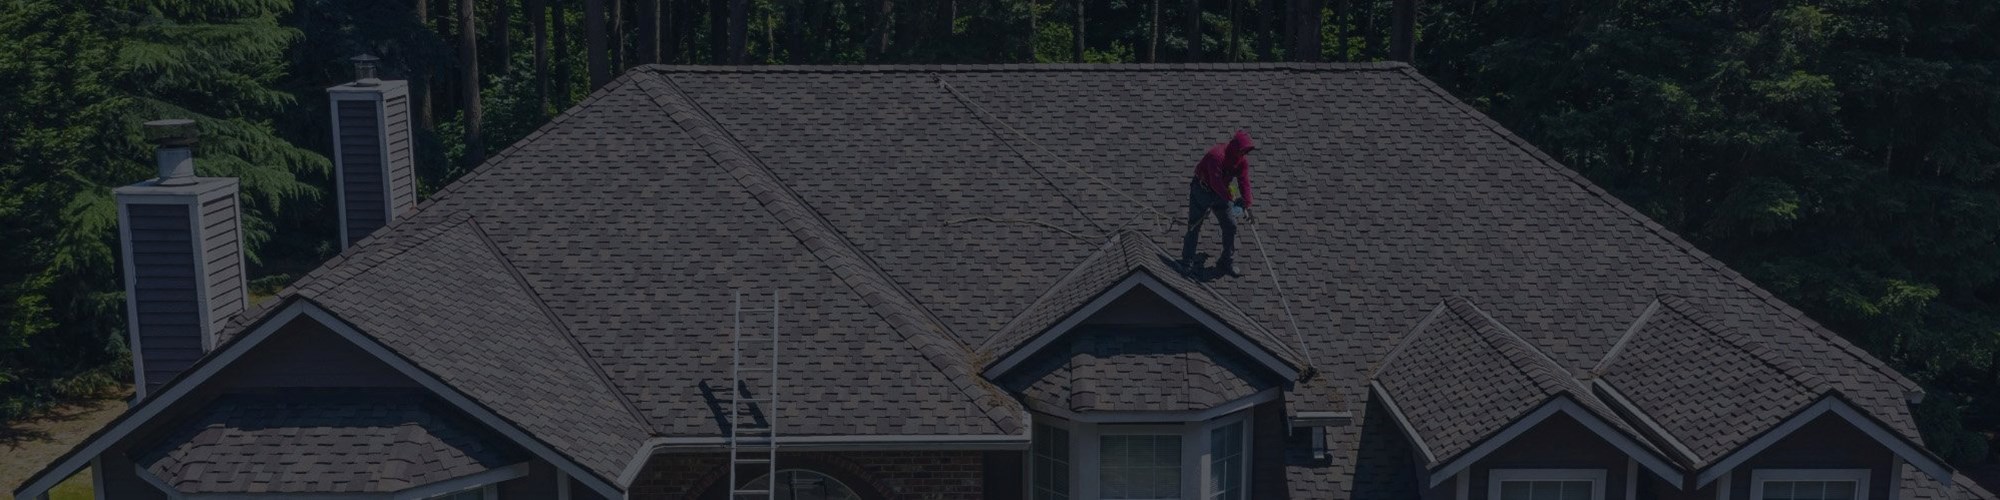 Seattle professional roof cleaning services